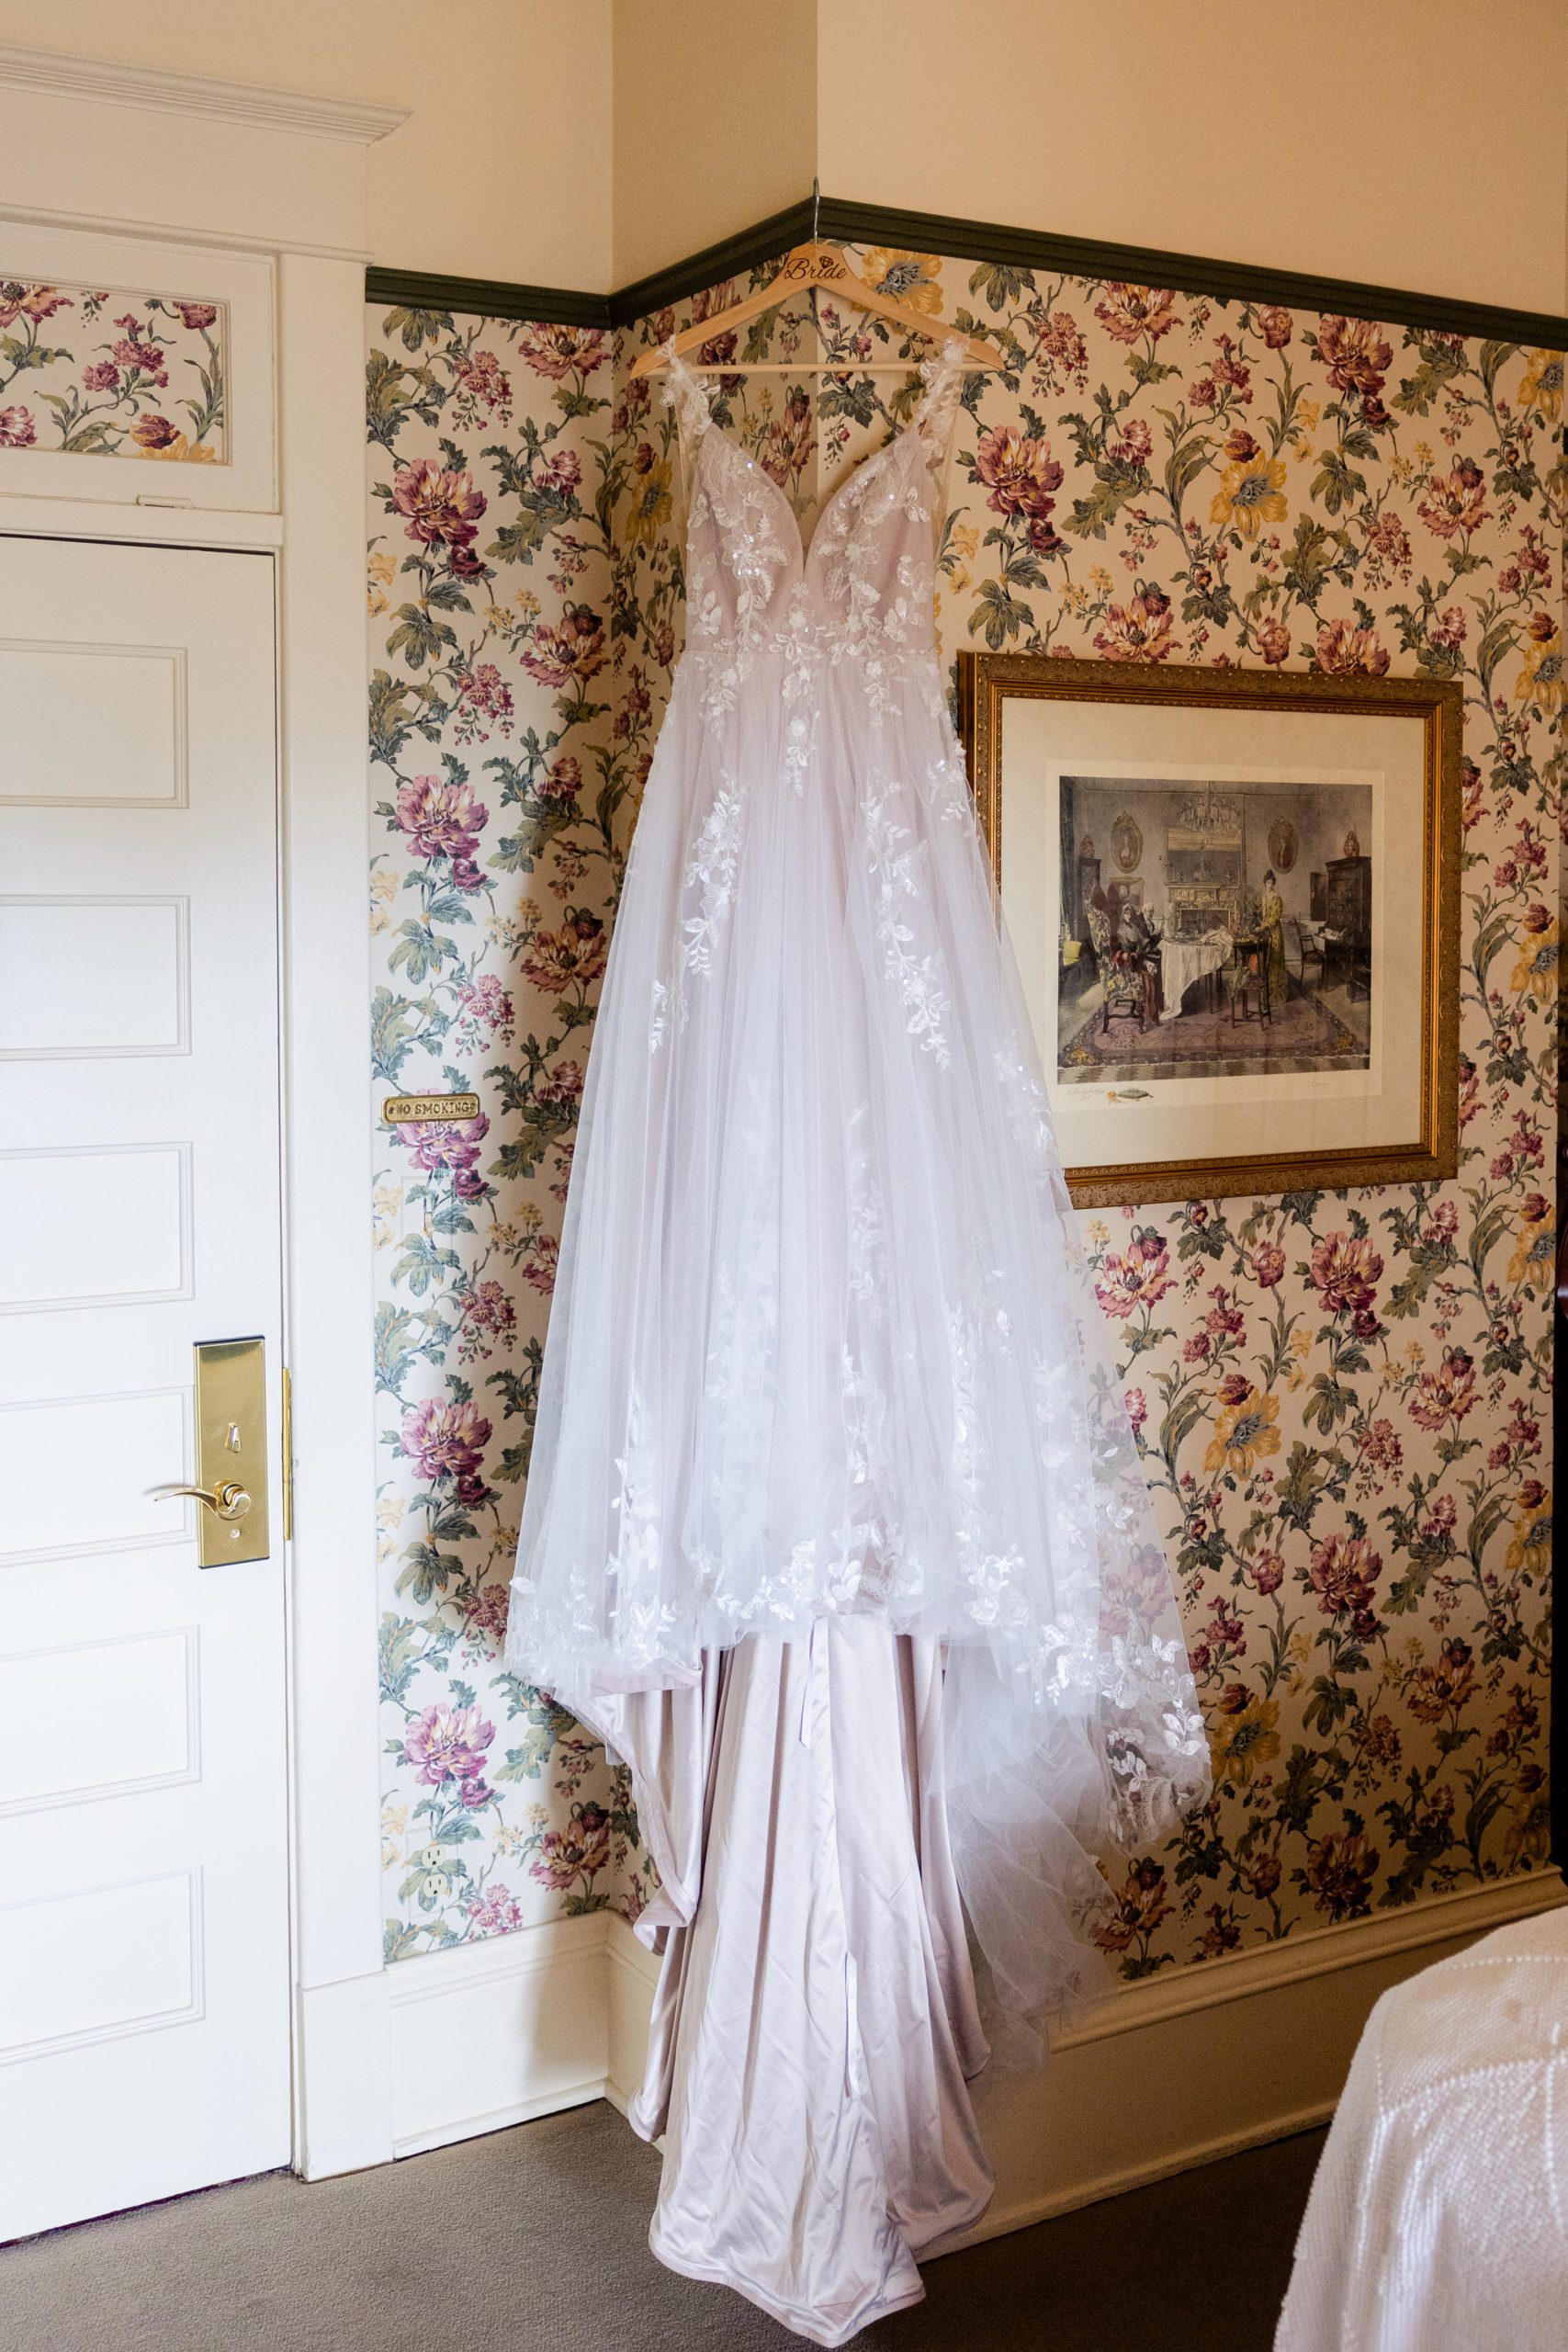 Wedding dress from LUV Bridal hanging up in the bridal suite in Hotel Boulderado